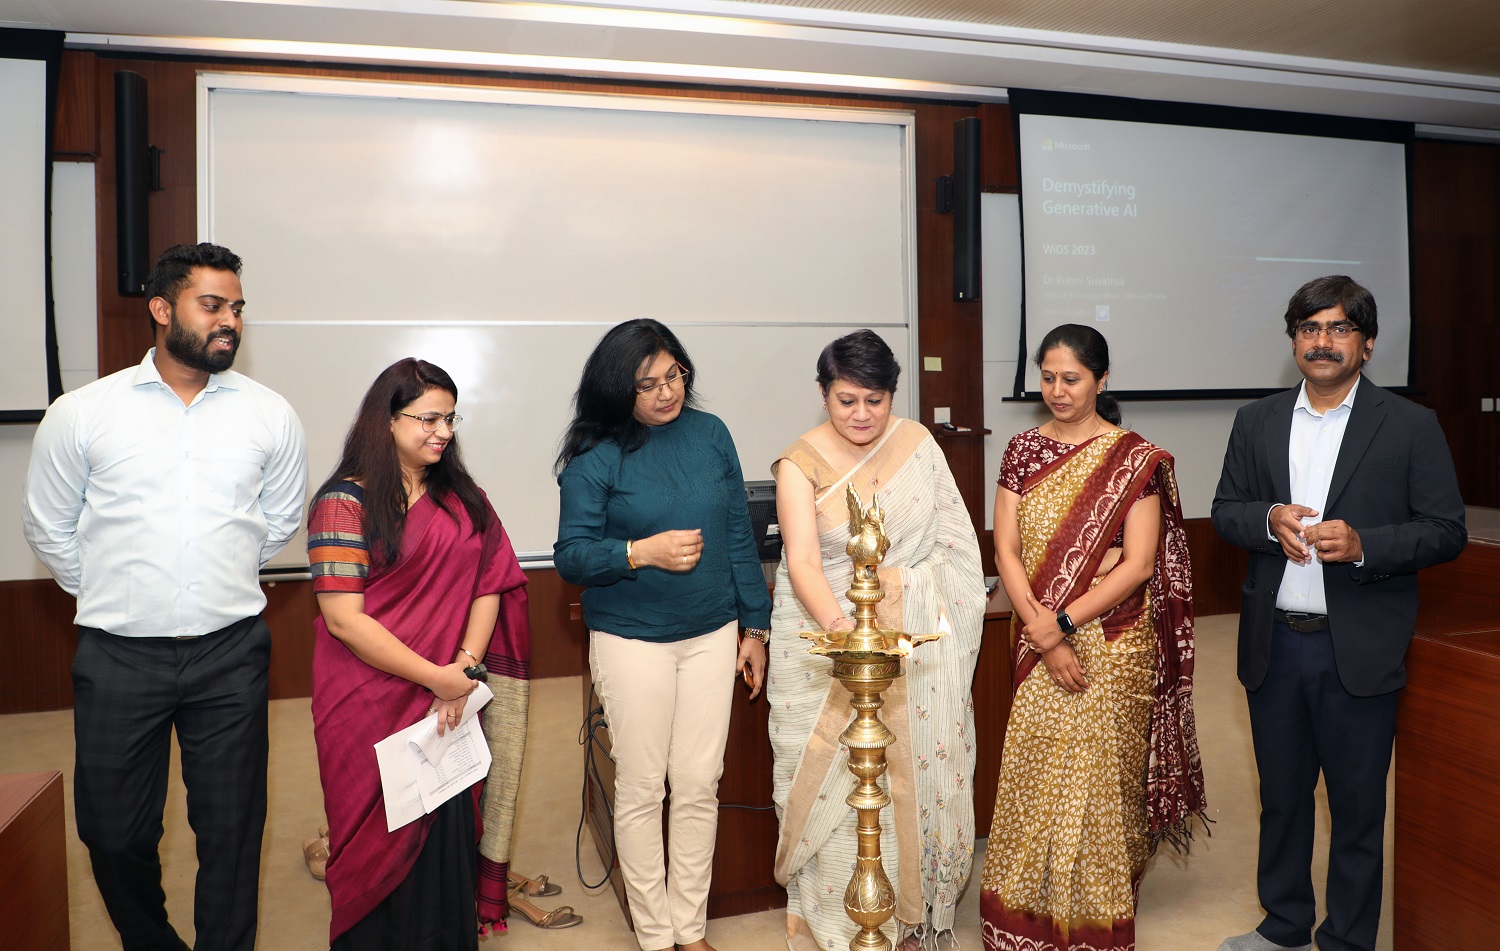 Inauguration of the Women in Data Science (WiDS) Bangalore Conference 2023, hosted by the Data Centre and Analytics Lab (DCAL) at IIM Bangalore, on 8th April 2023.